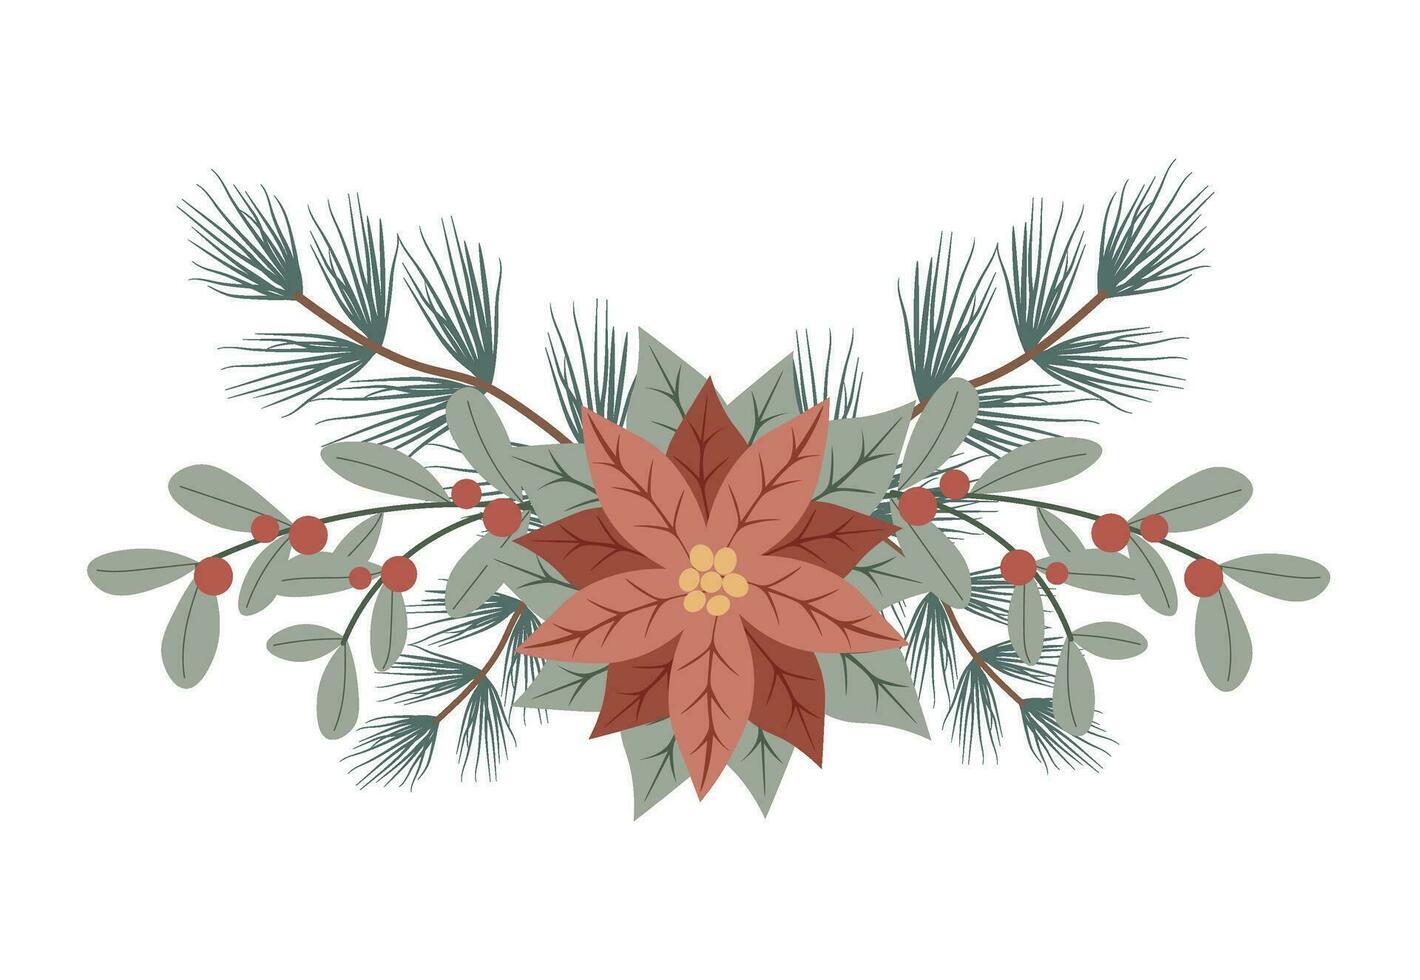 Winter Christmas floral composition with pancetta and red berries. Design for Holidays invitation card, poster, banner, greeting card, postcard vector